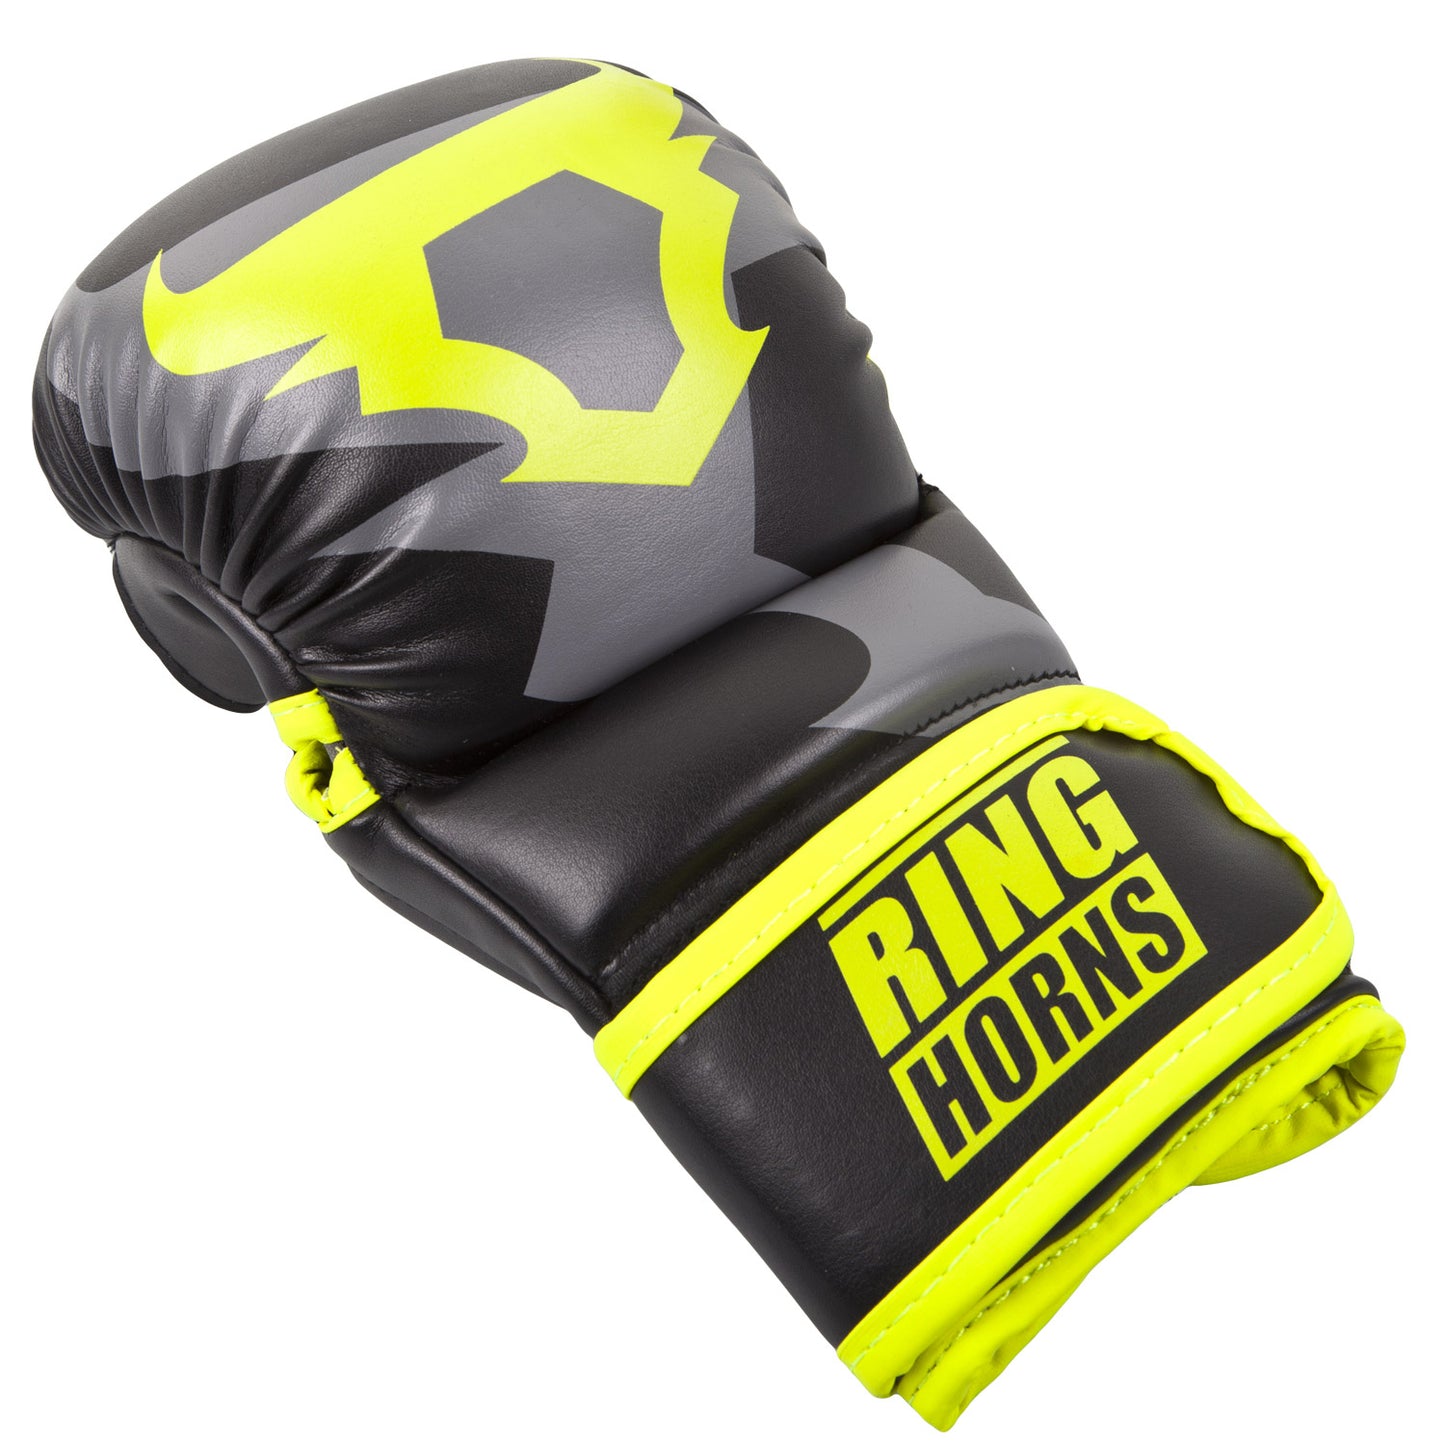 Ringhorns Charger Sparring Gloves - Black/Neo Yellow